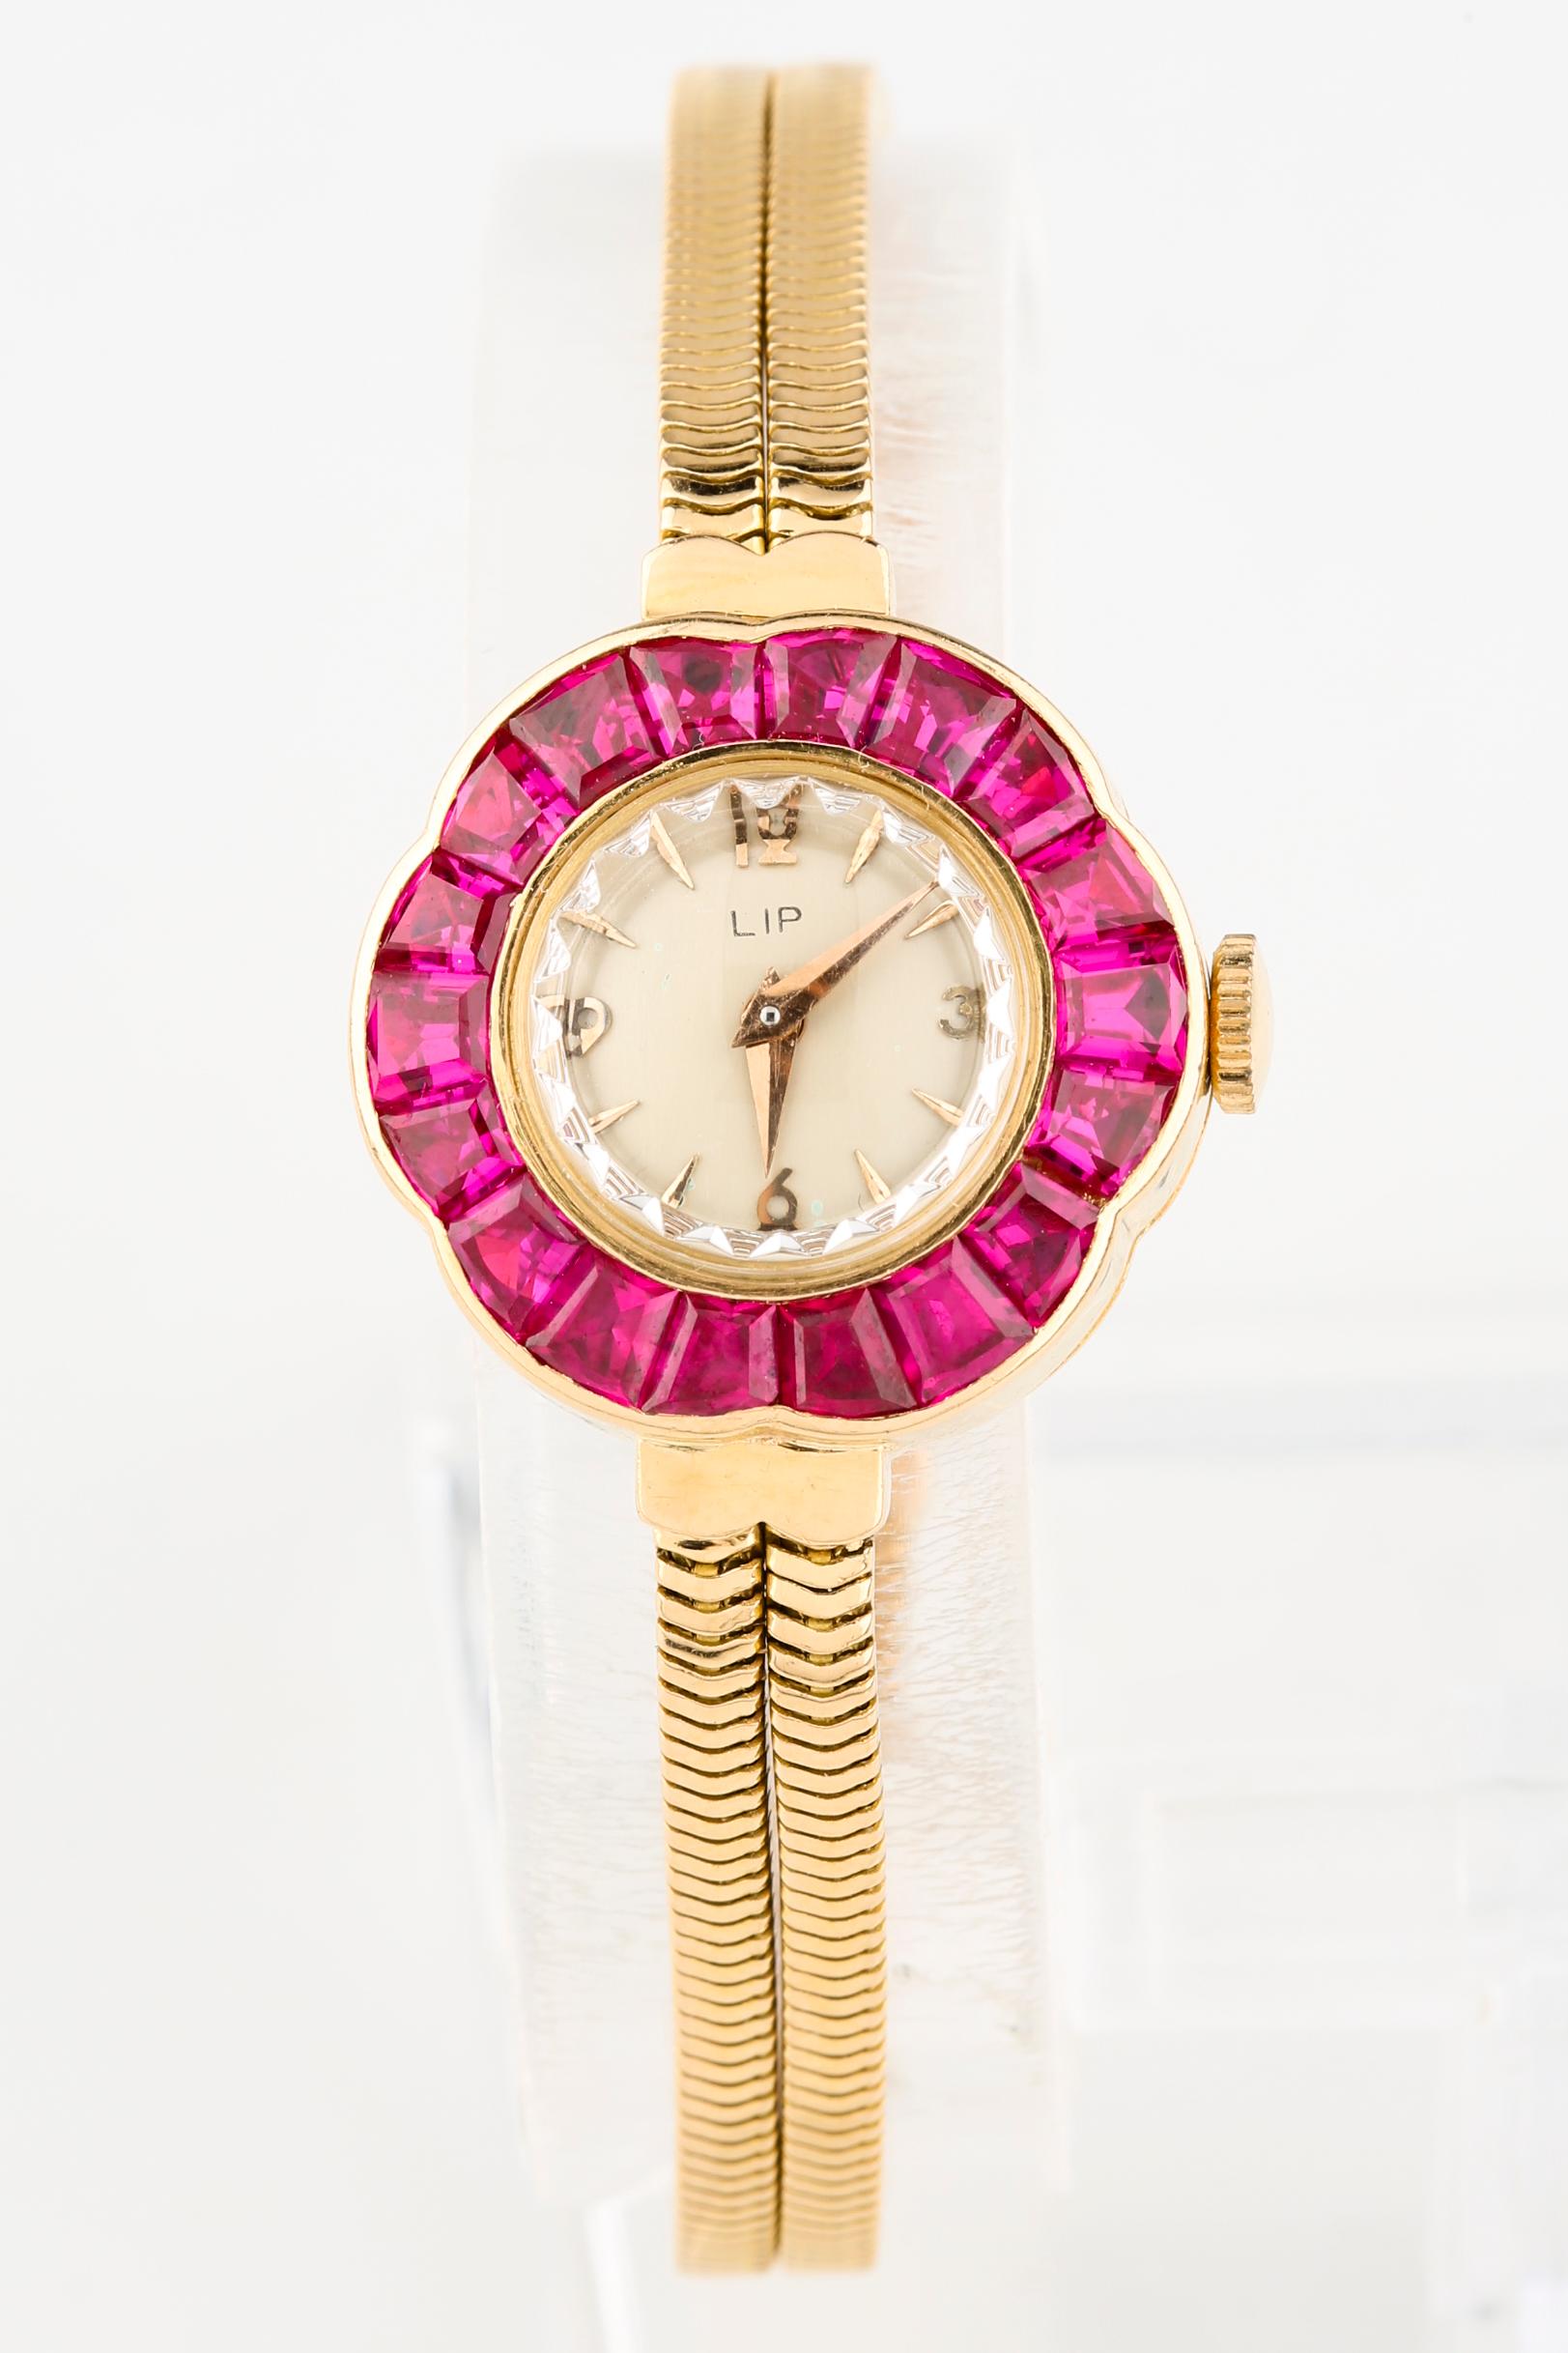 18k Yellow Gold Flower-Shaped Case
23 mm in Diameter (24.5 mm w/ Crown)
Bezel Features 18 Custom-Shaped Rubies in Ballerina Baguette Formation
Round Dial w/ Gold Tic Marks and Hands (M + H)
Features Crystal Faceted Along the Border
14 mm in